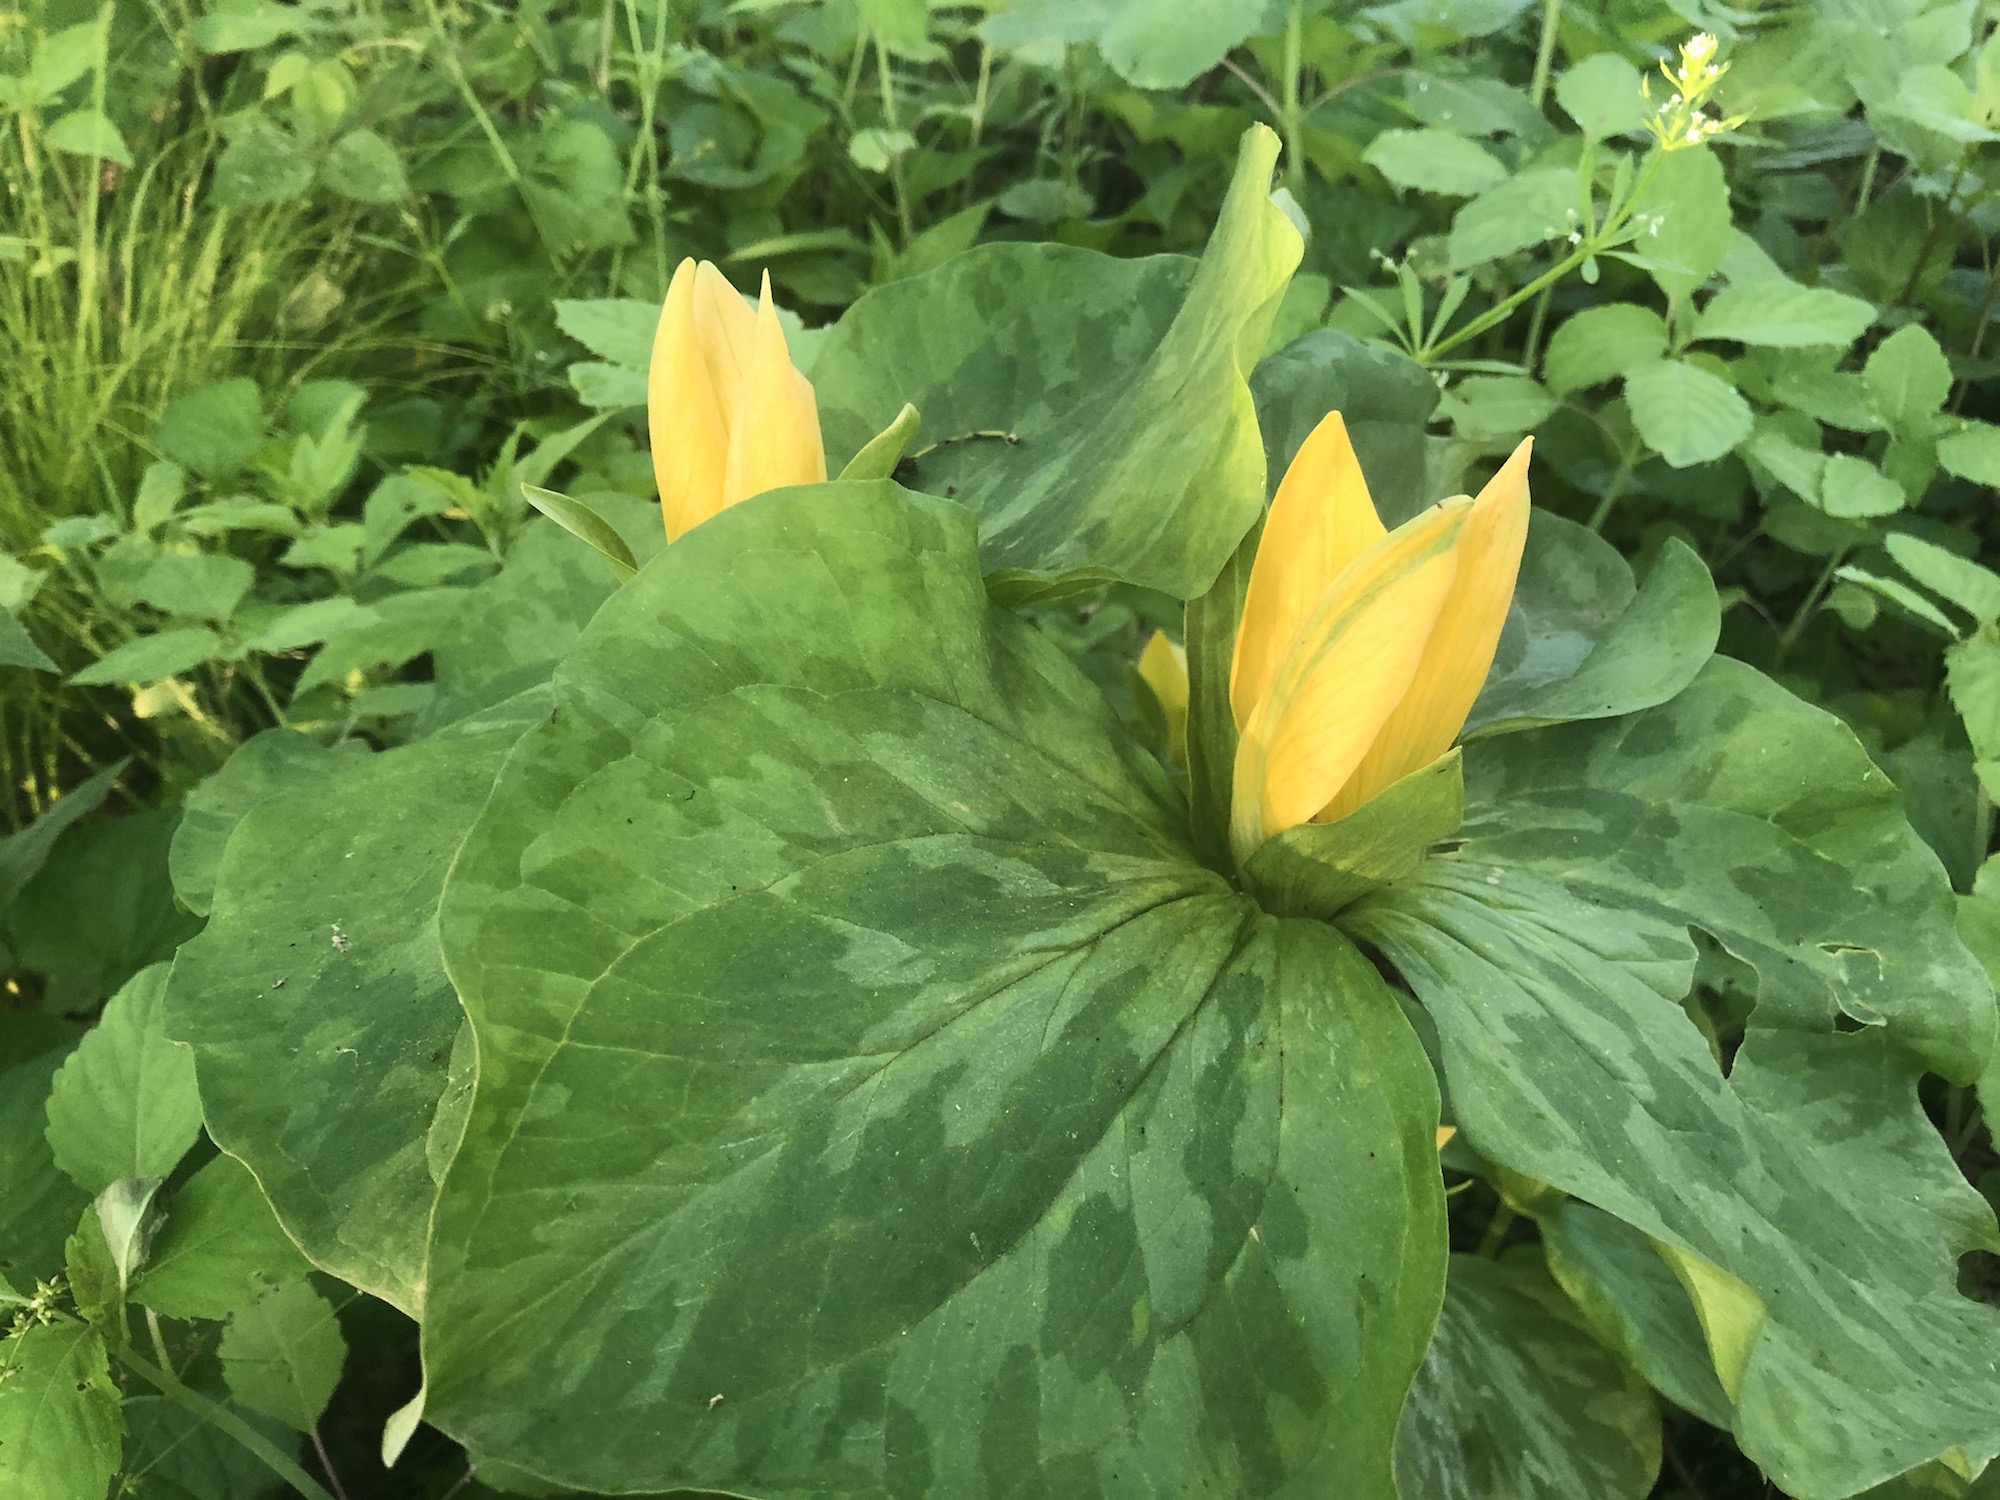 Trillium off of bike path between Marion Dunn and Duck Pond on May 31, 2020.